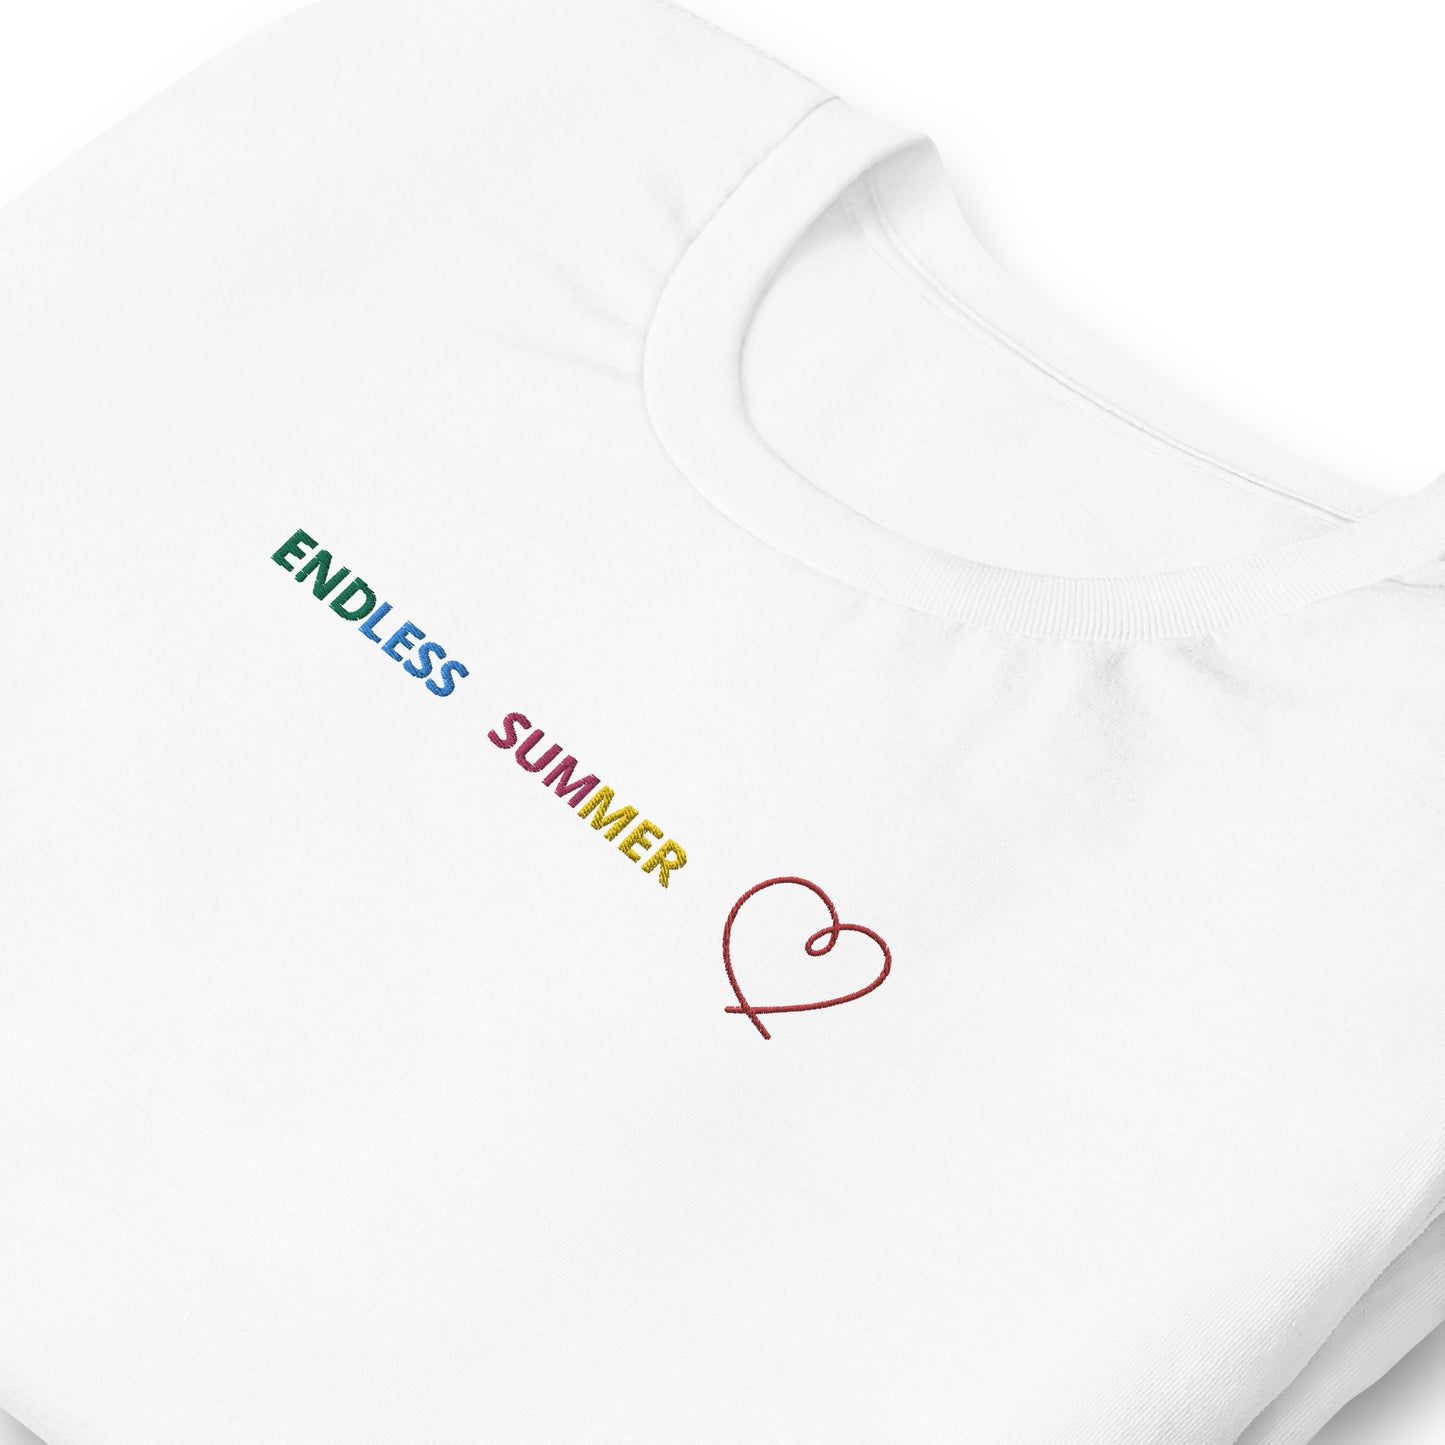 ENDLESS SUMMER LOVE - embroidered T-shirt